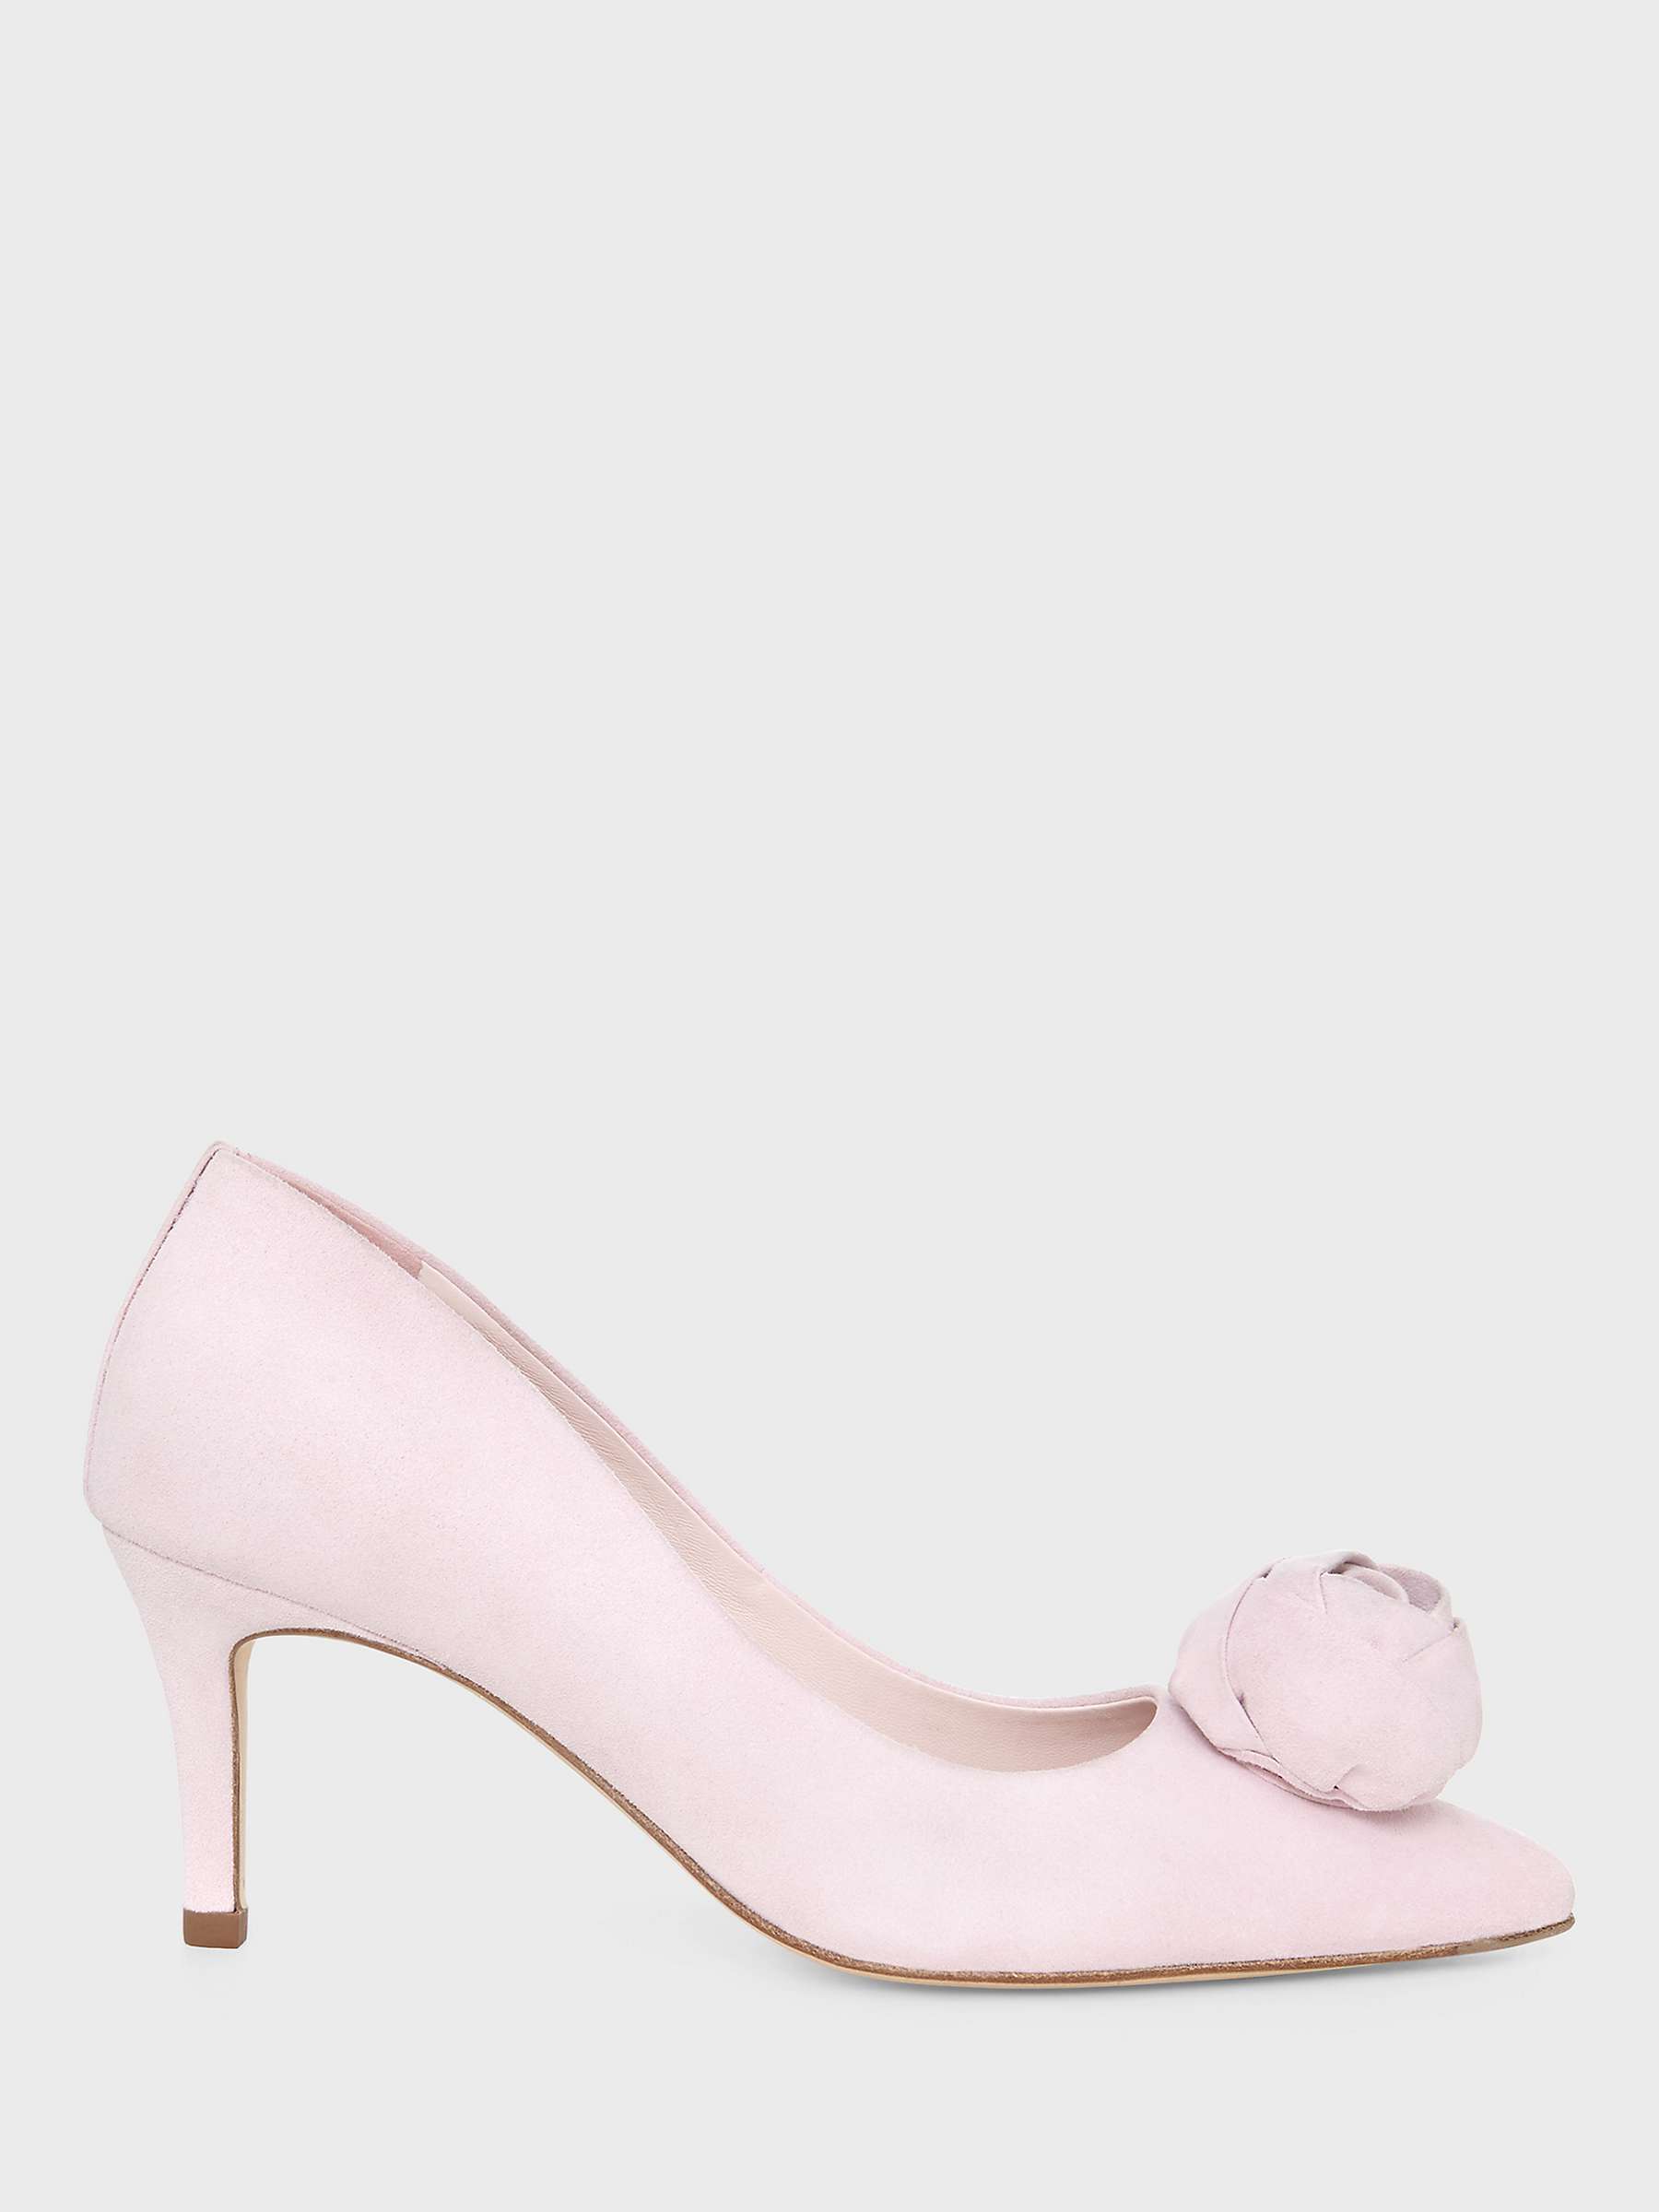 Buy Hobbs Maisie Suede Court Shoes, Pale Pink Online at johnlewis.com